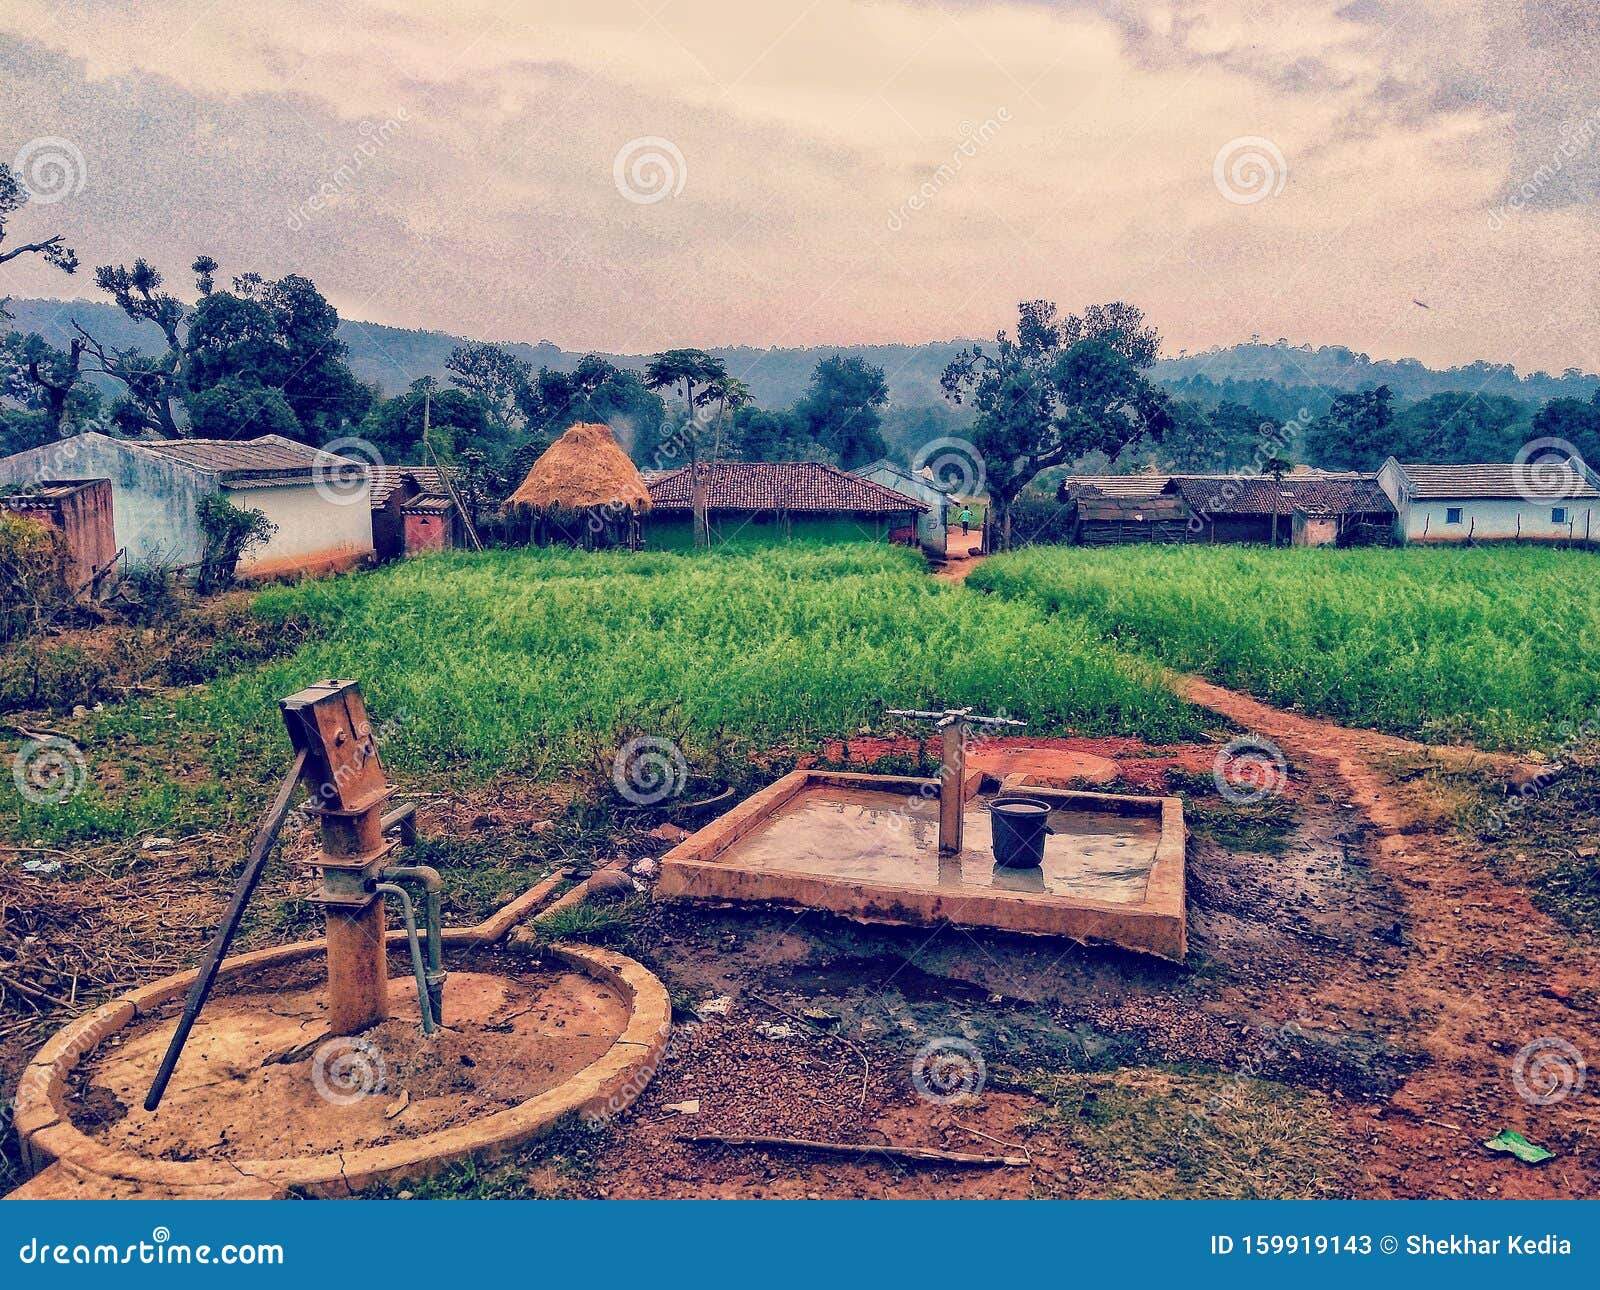 177 Rustic Indian Village Scene Stock Photos - Free & Royalty-Free Stock  Photos from Dreamstime